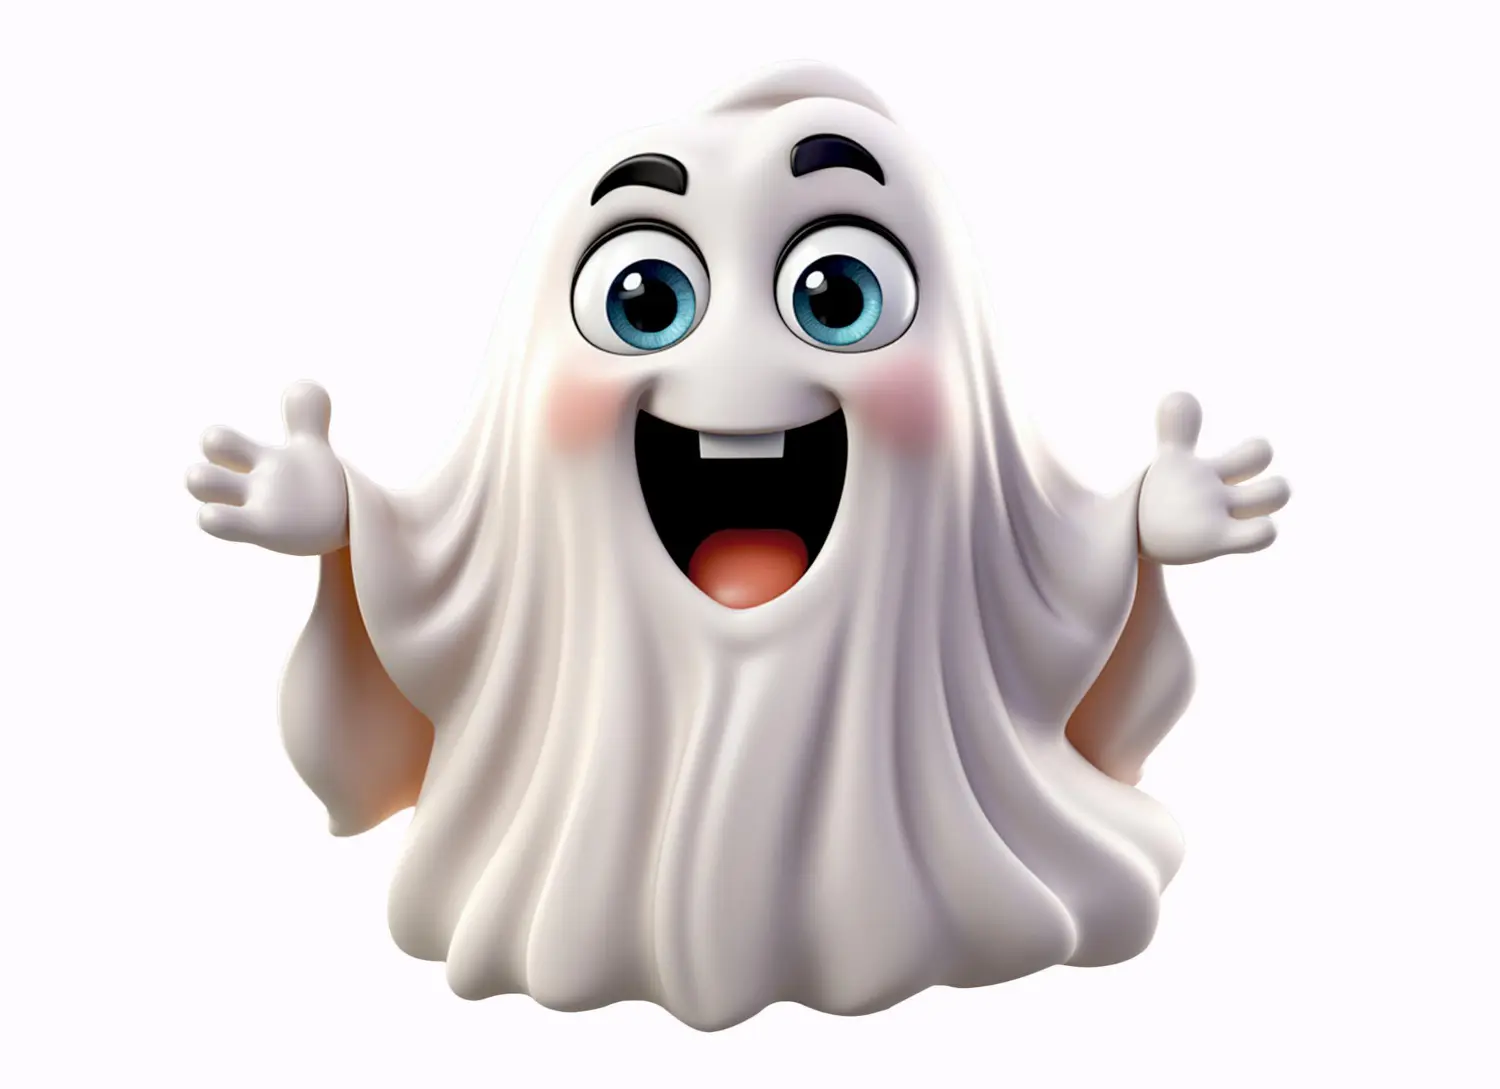 happy ghost